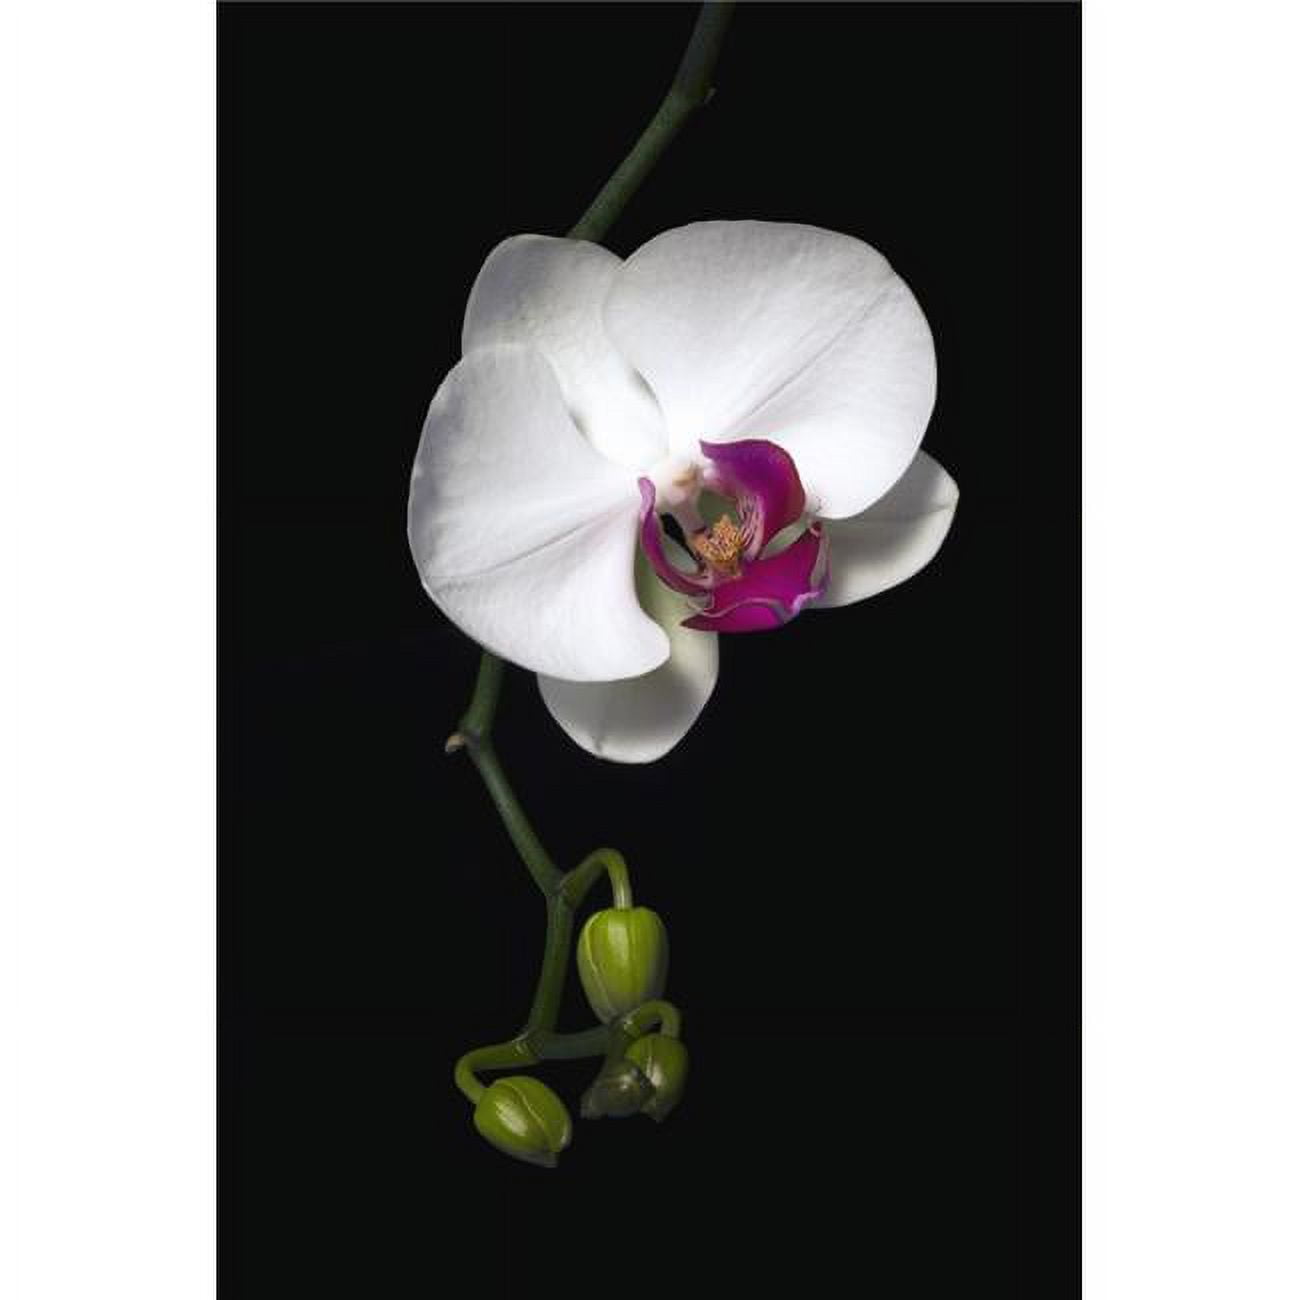 Print Posterazzi x 24 Large Poster - Orchid by DPI1831101LARGE Chapman, David 36